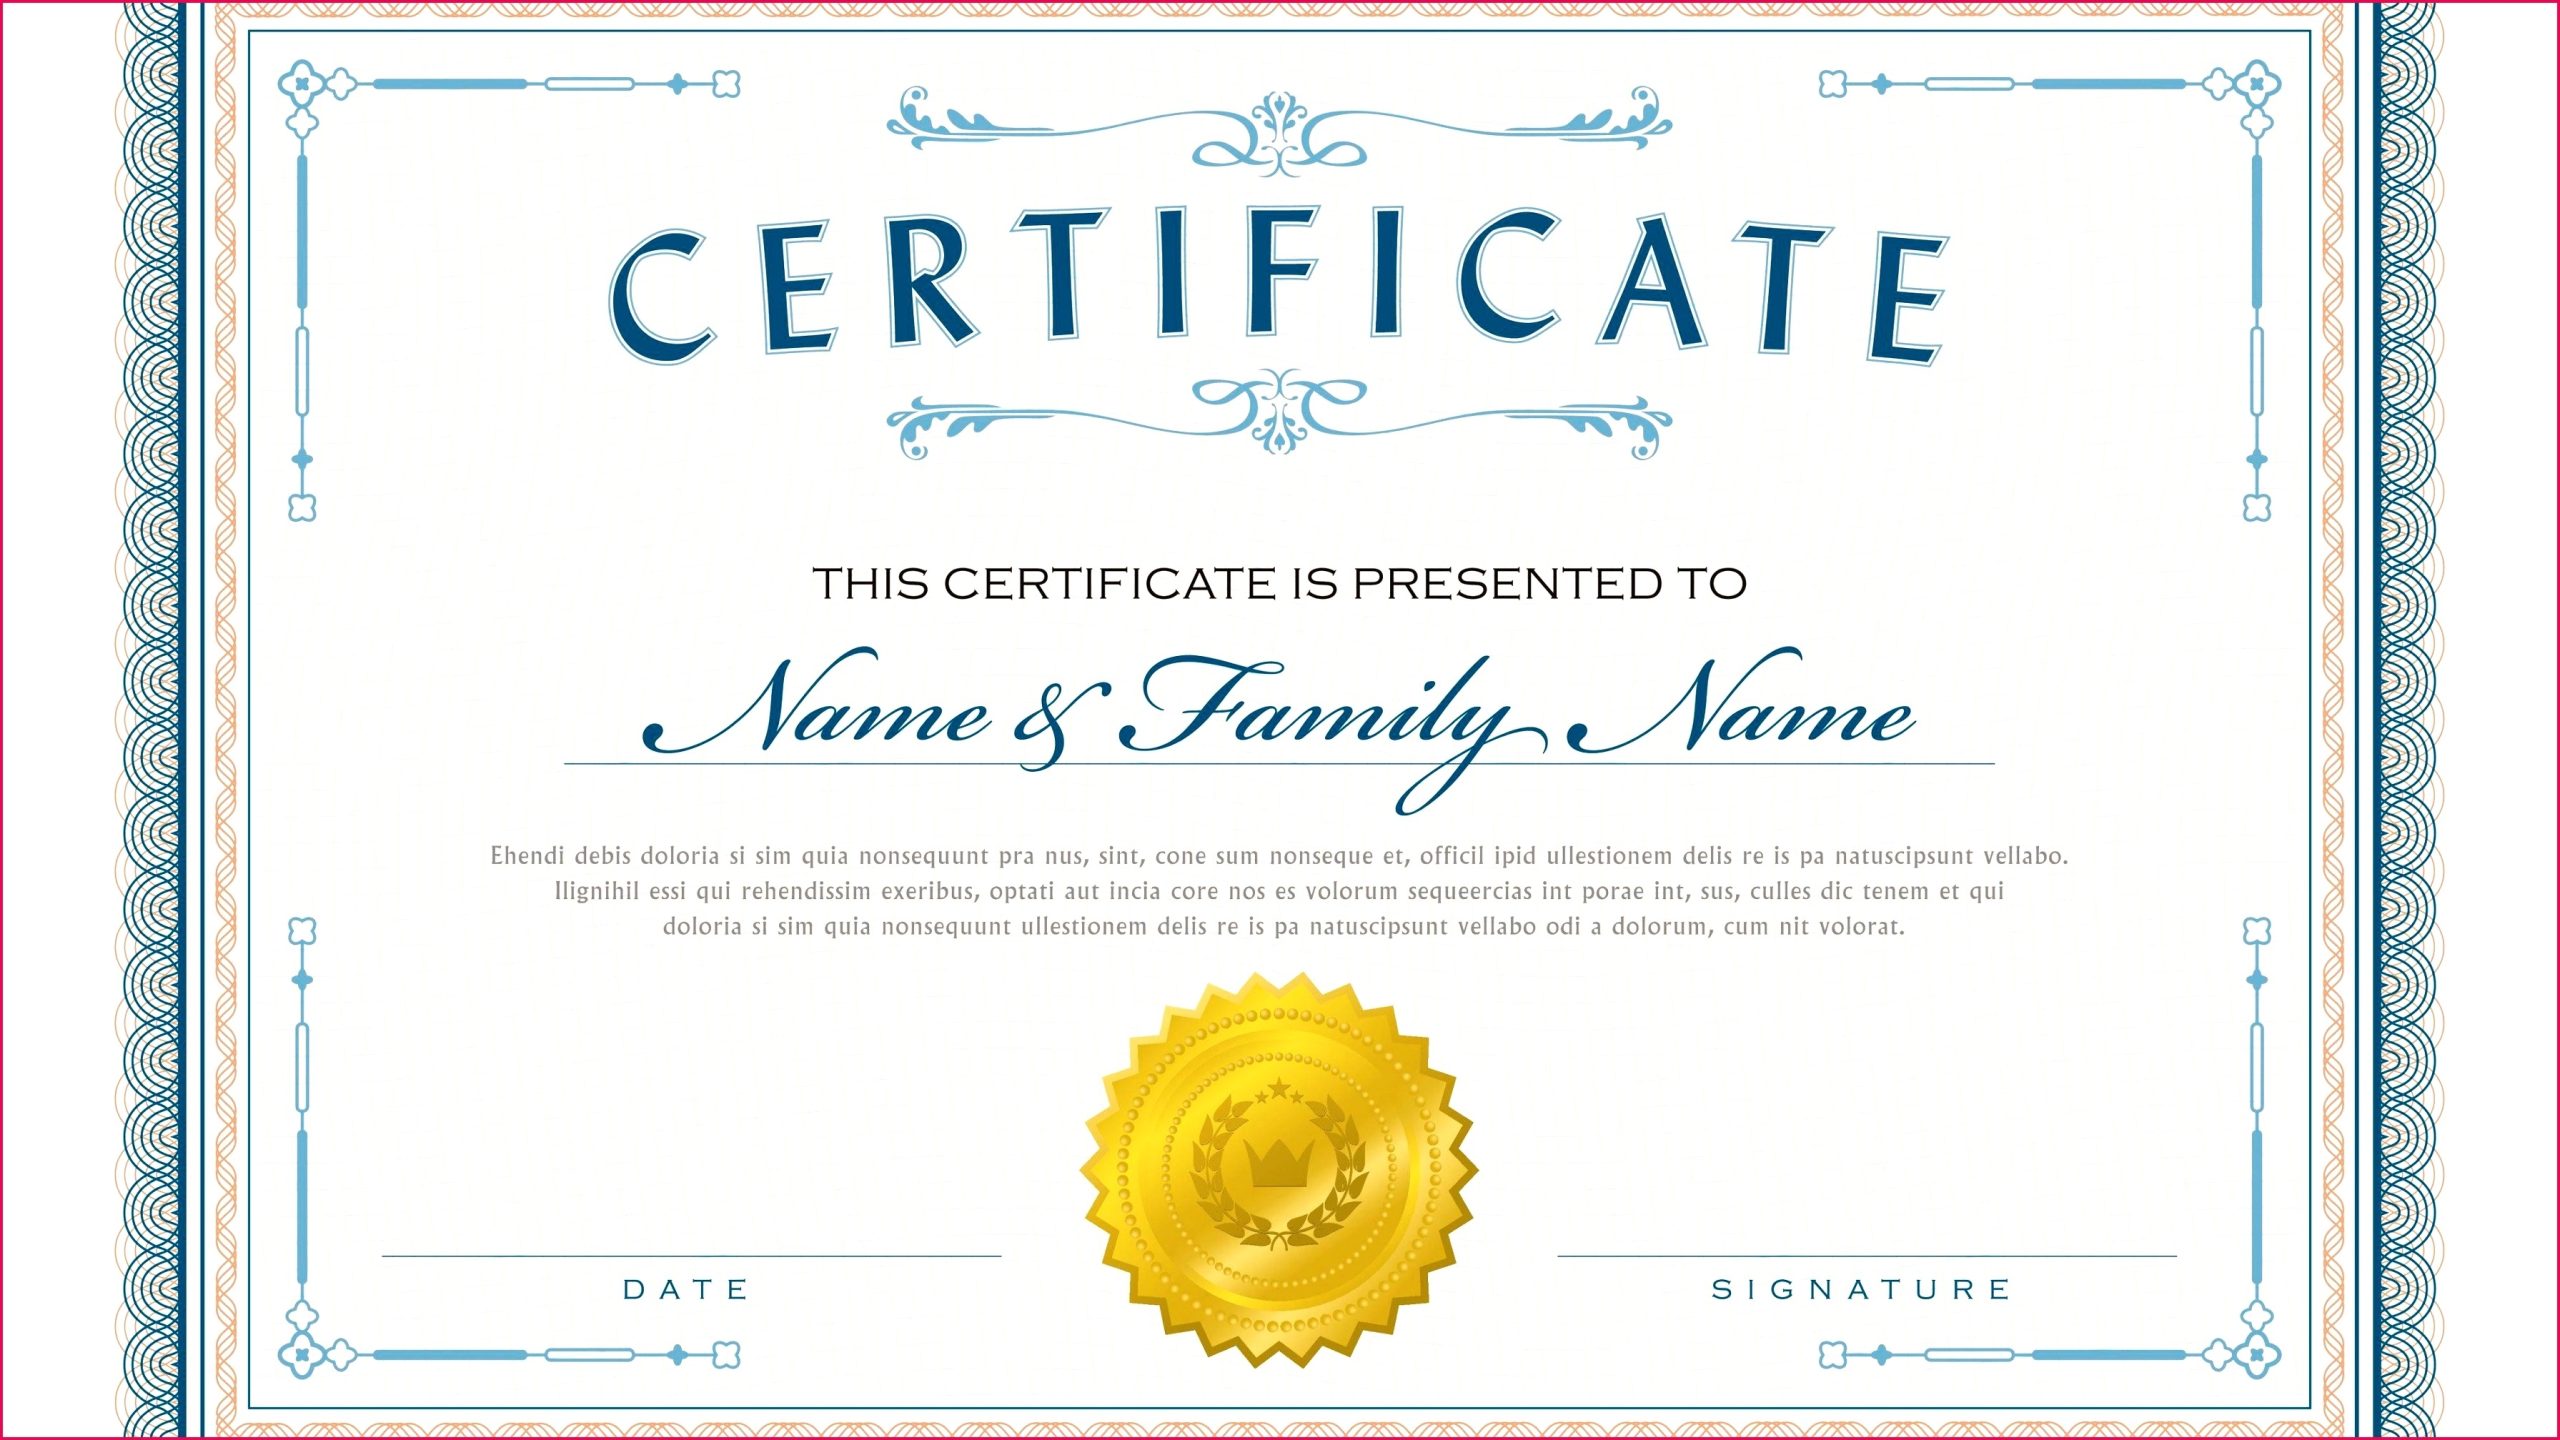 6 Certificate Of Achievement Wording Samples 50108 | Fabtemplatez Throughout Certificate Of Attainment Template